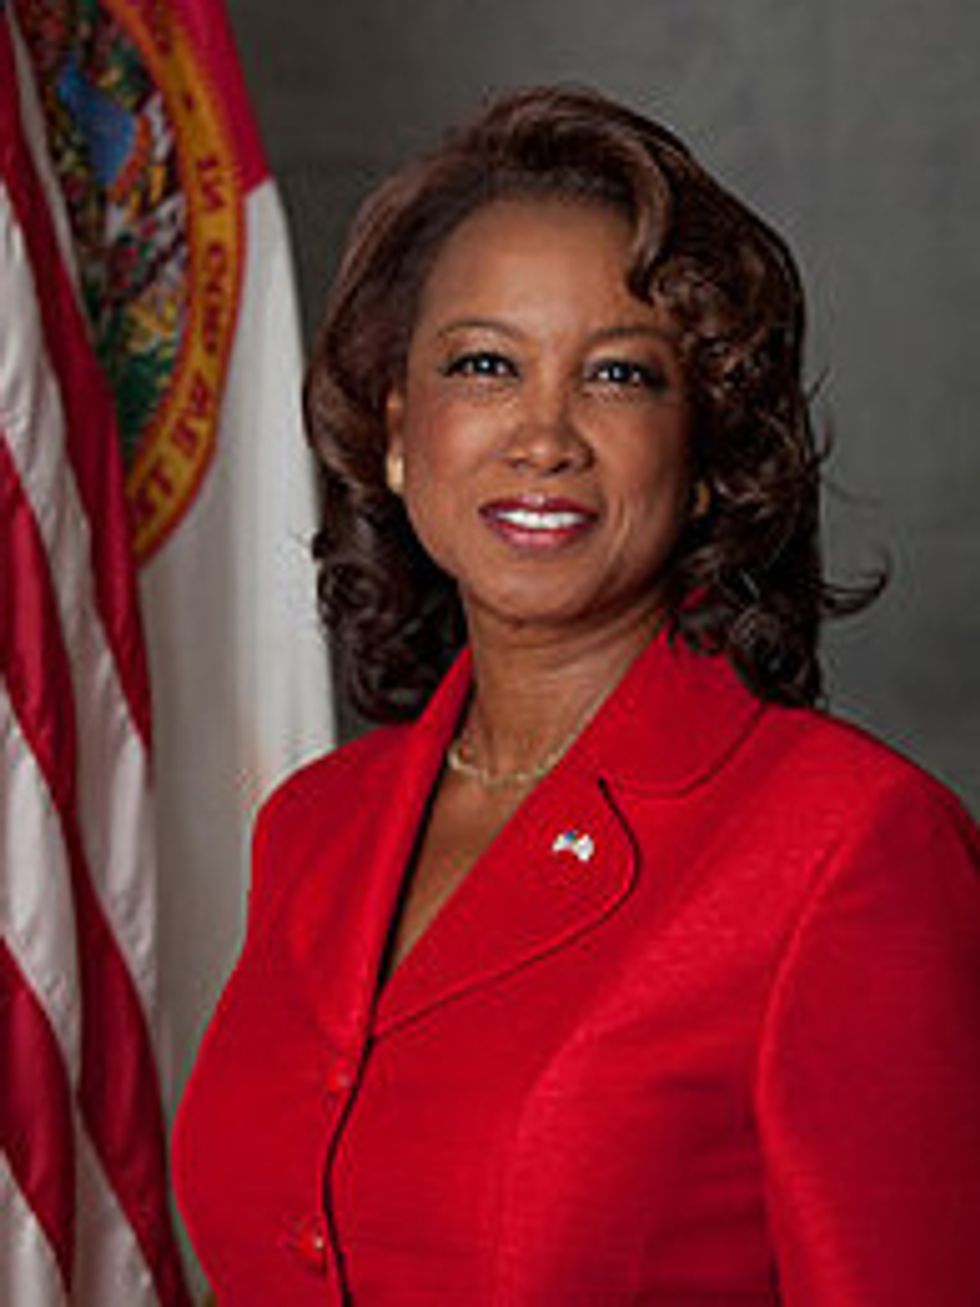 Nice Lt. Gov. Of Florida Knows Nothing About Trayvon Martin Case, But Thanks For Calling